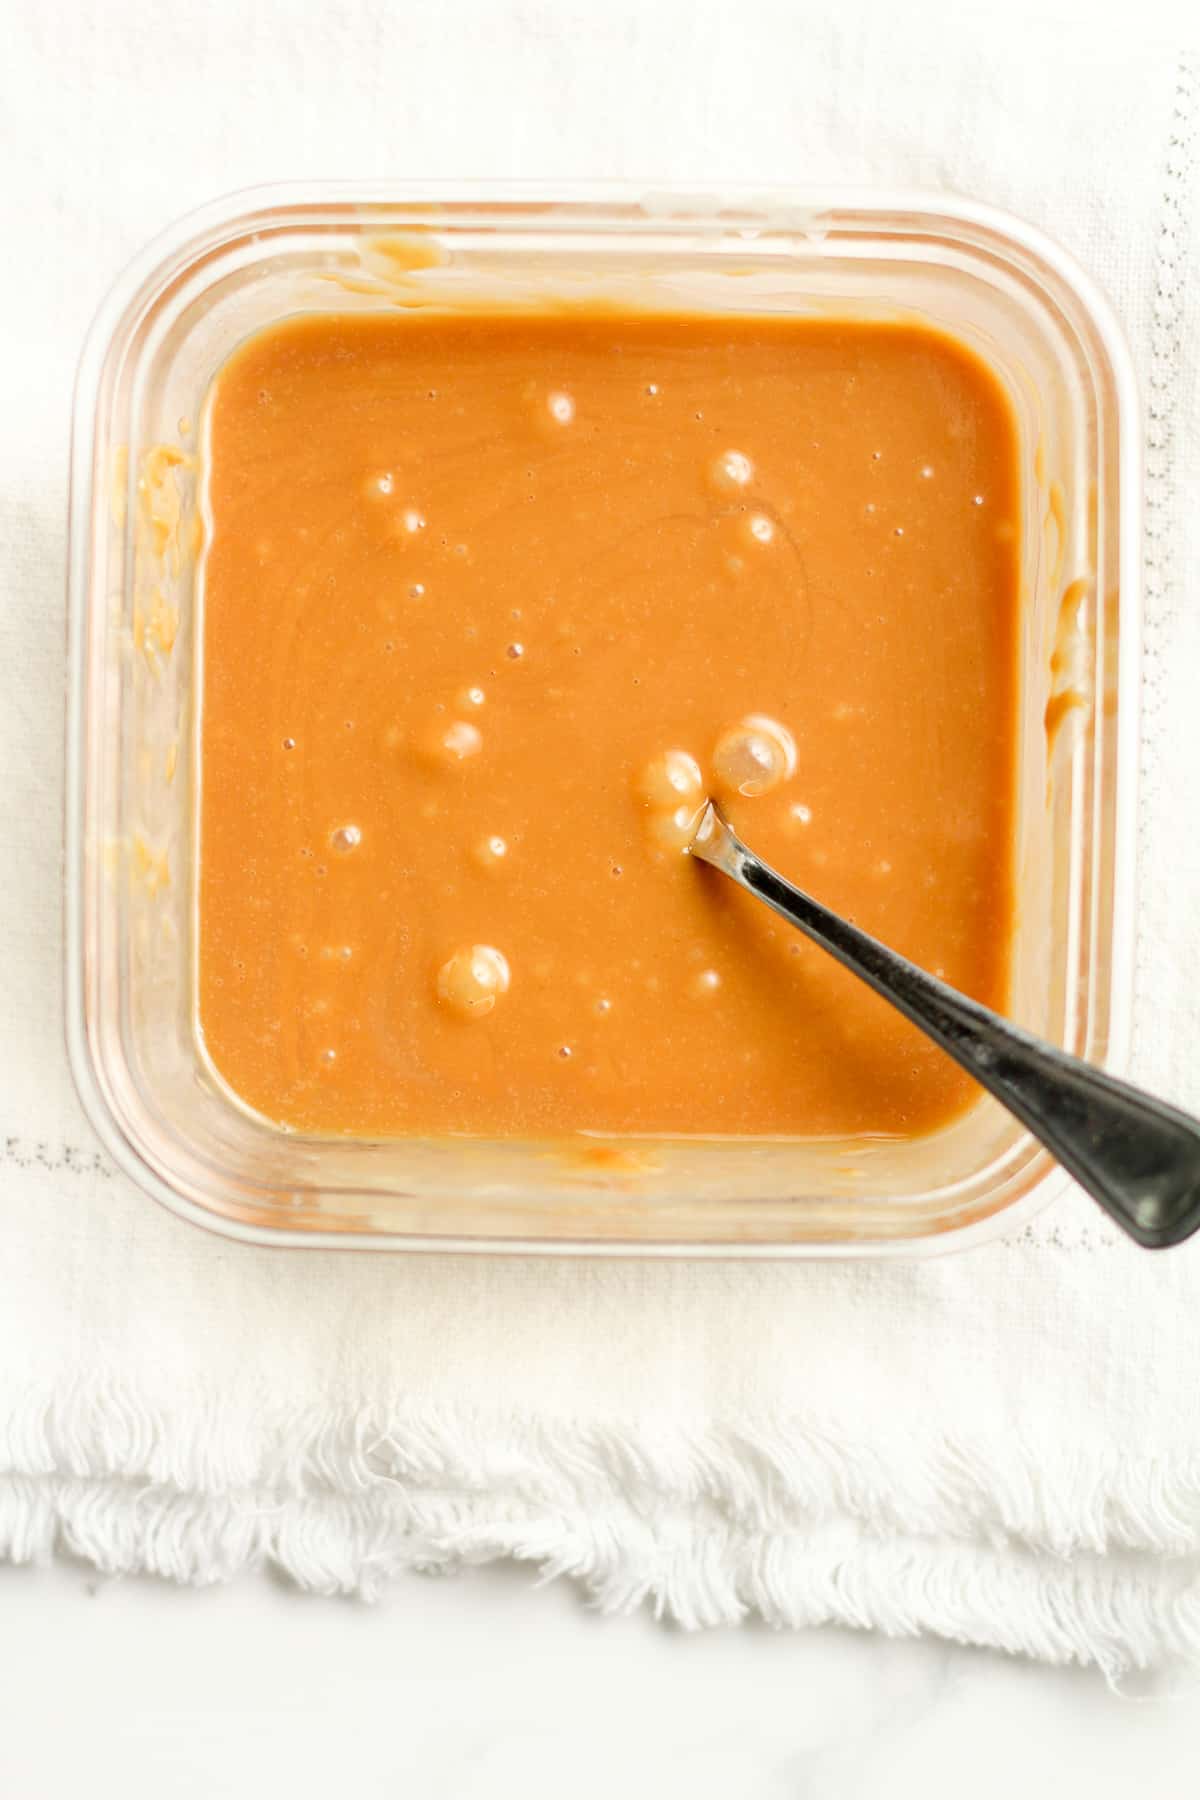 A dish of the melted caramel.